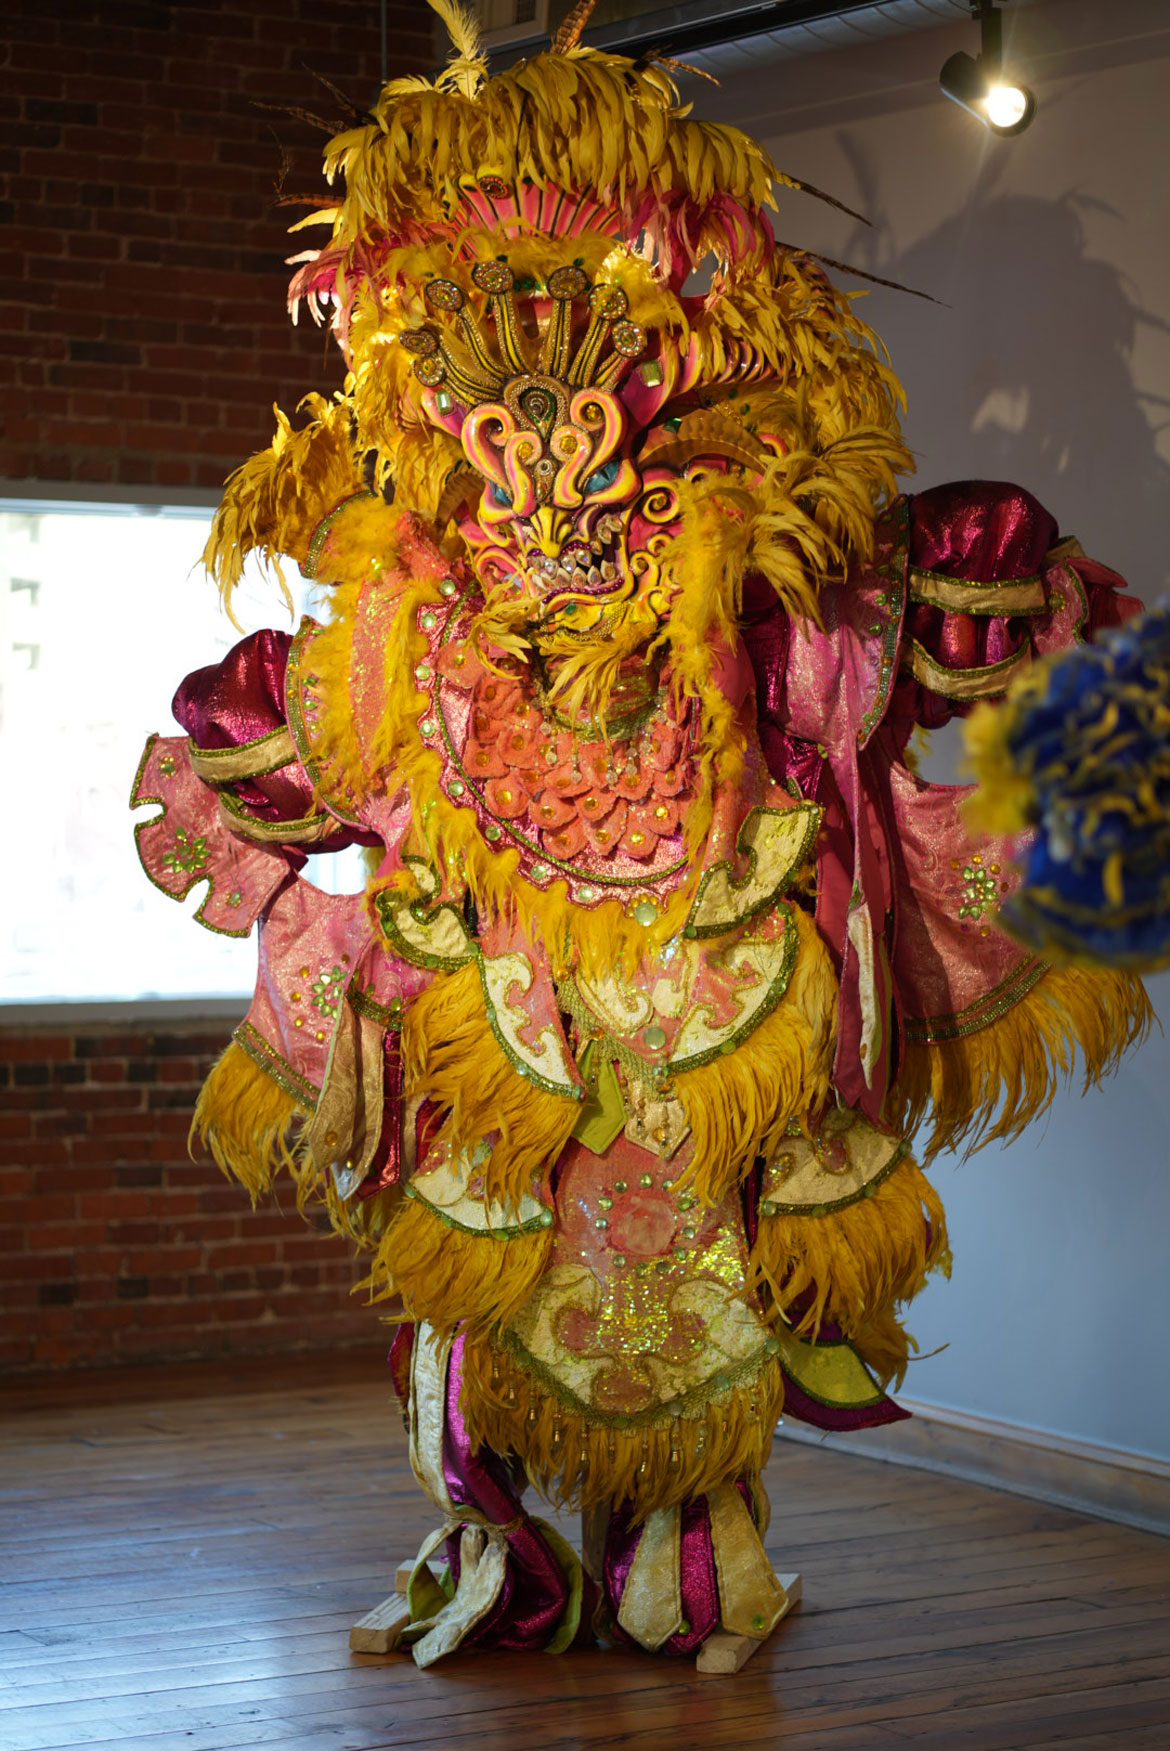 Asociacion Carnavalesca de Massachusetts mask and suit in “El Carnaval Continúa" at the Essex Art Center, Lawrence. (Mariana Martins photo)